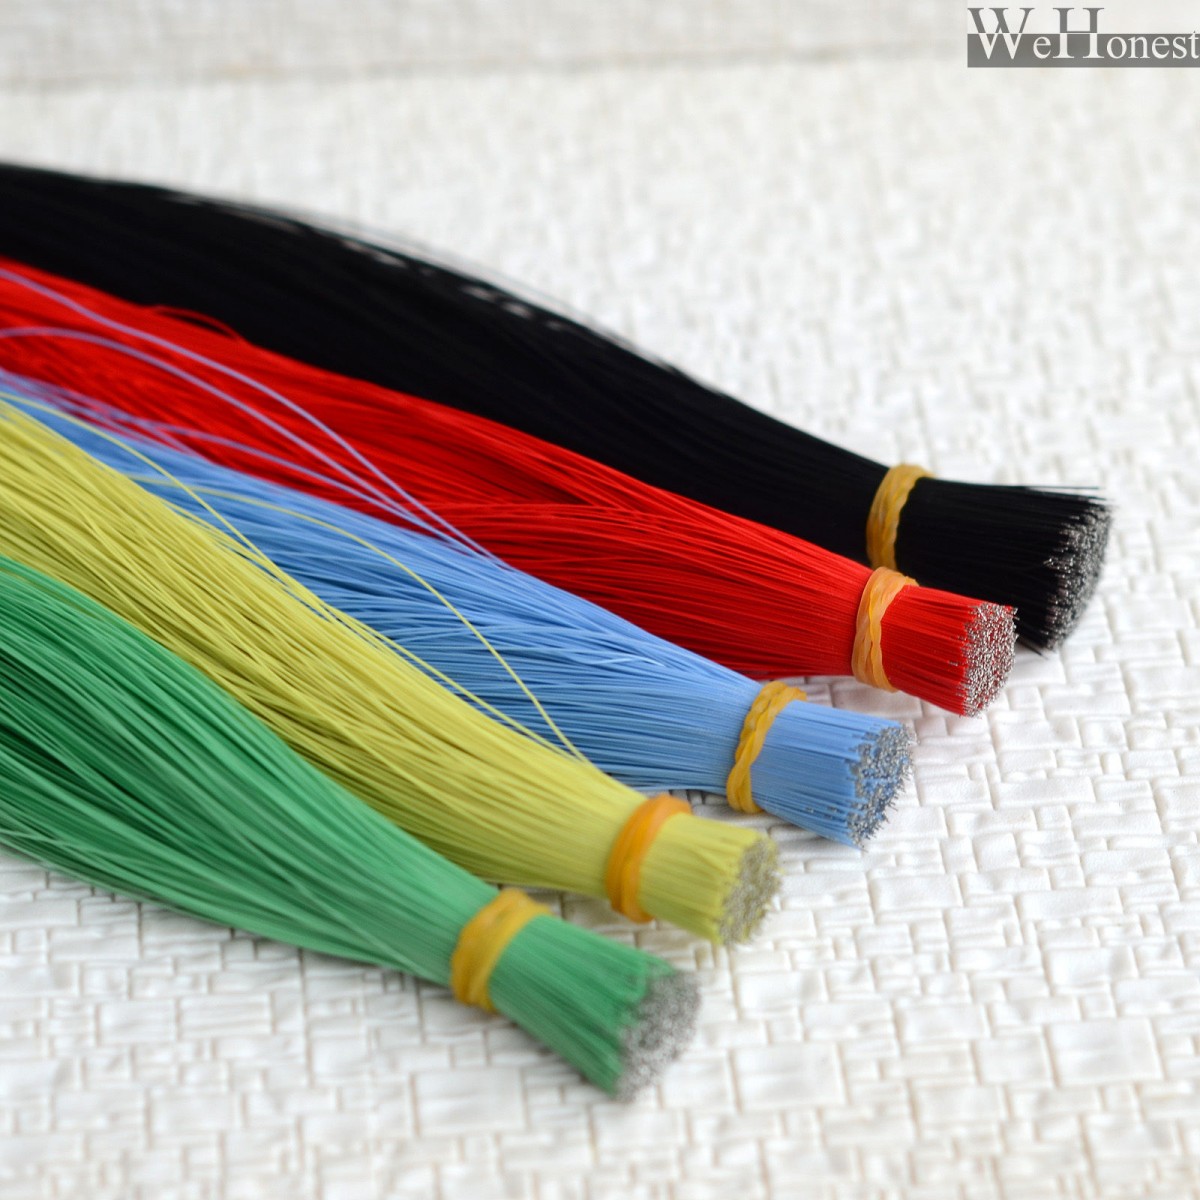   50 Mixed 180mm 7/0.05 pre-cut ultra slim Dia. 0.28mm 0.011" thin Wires (WeHonest)